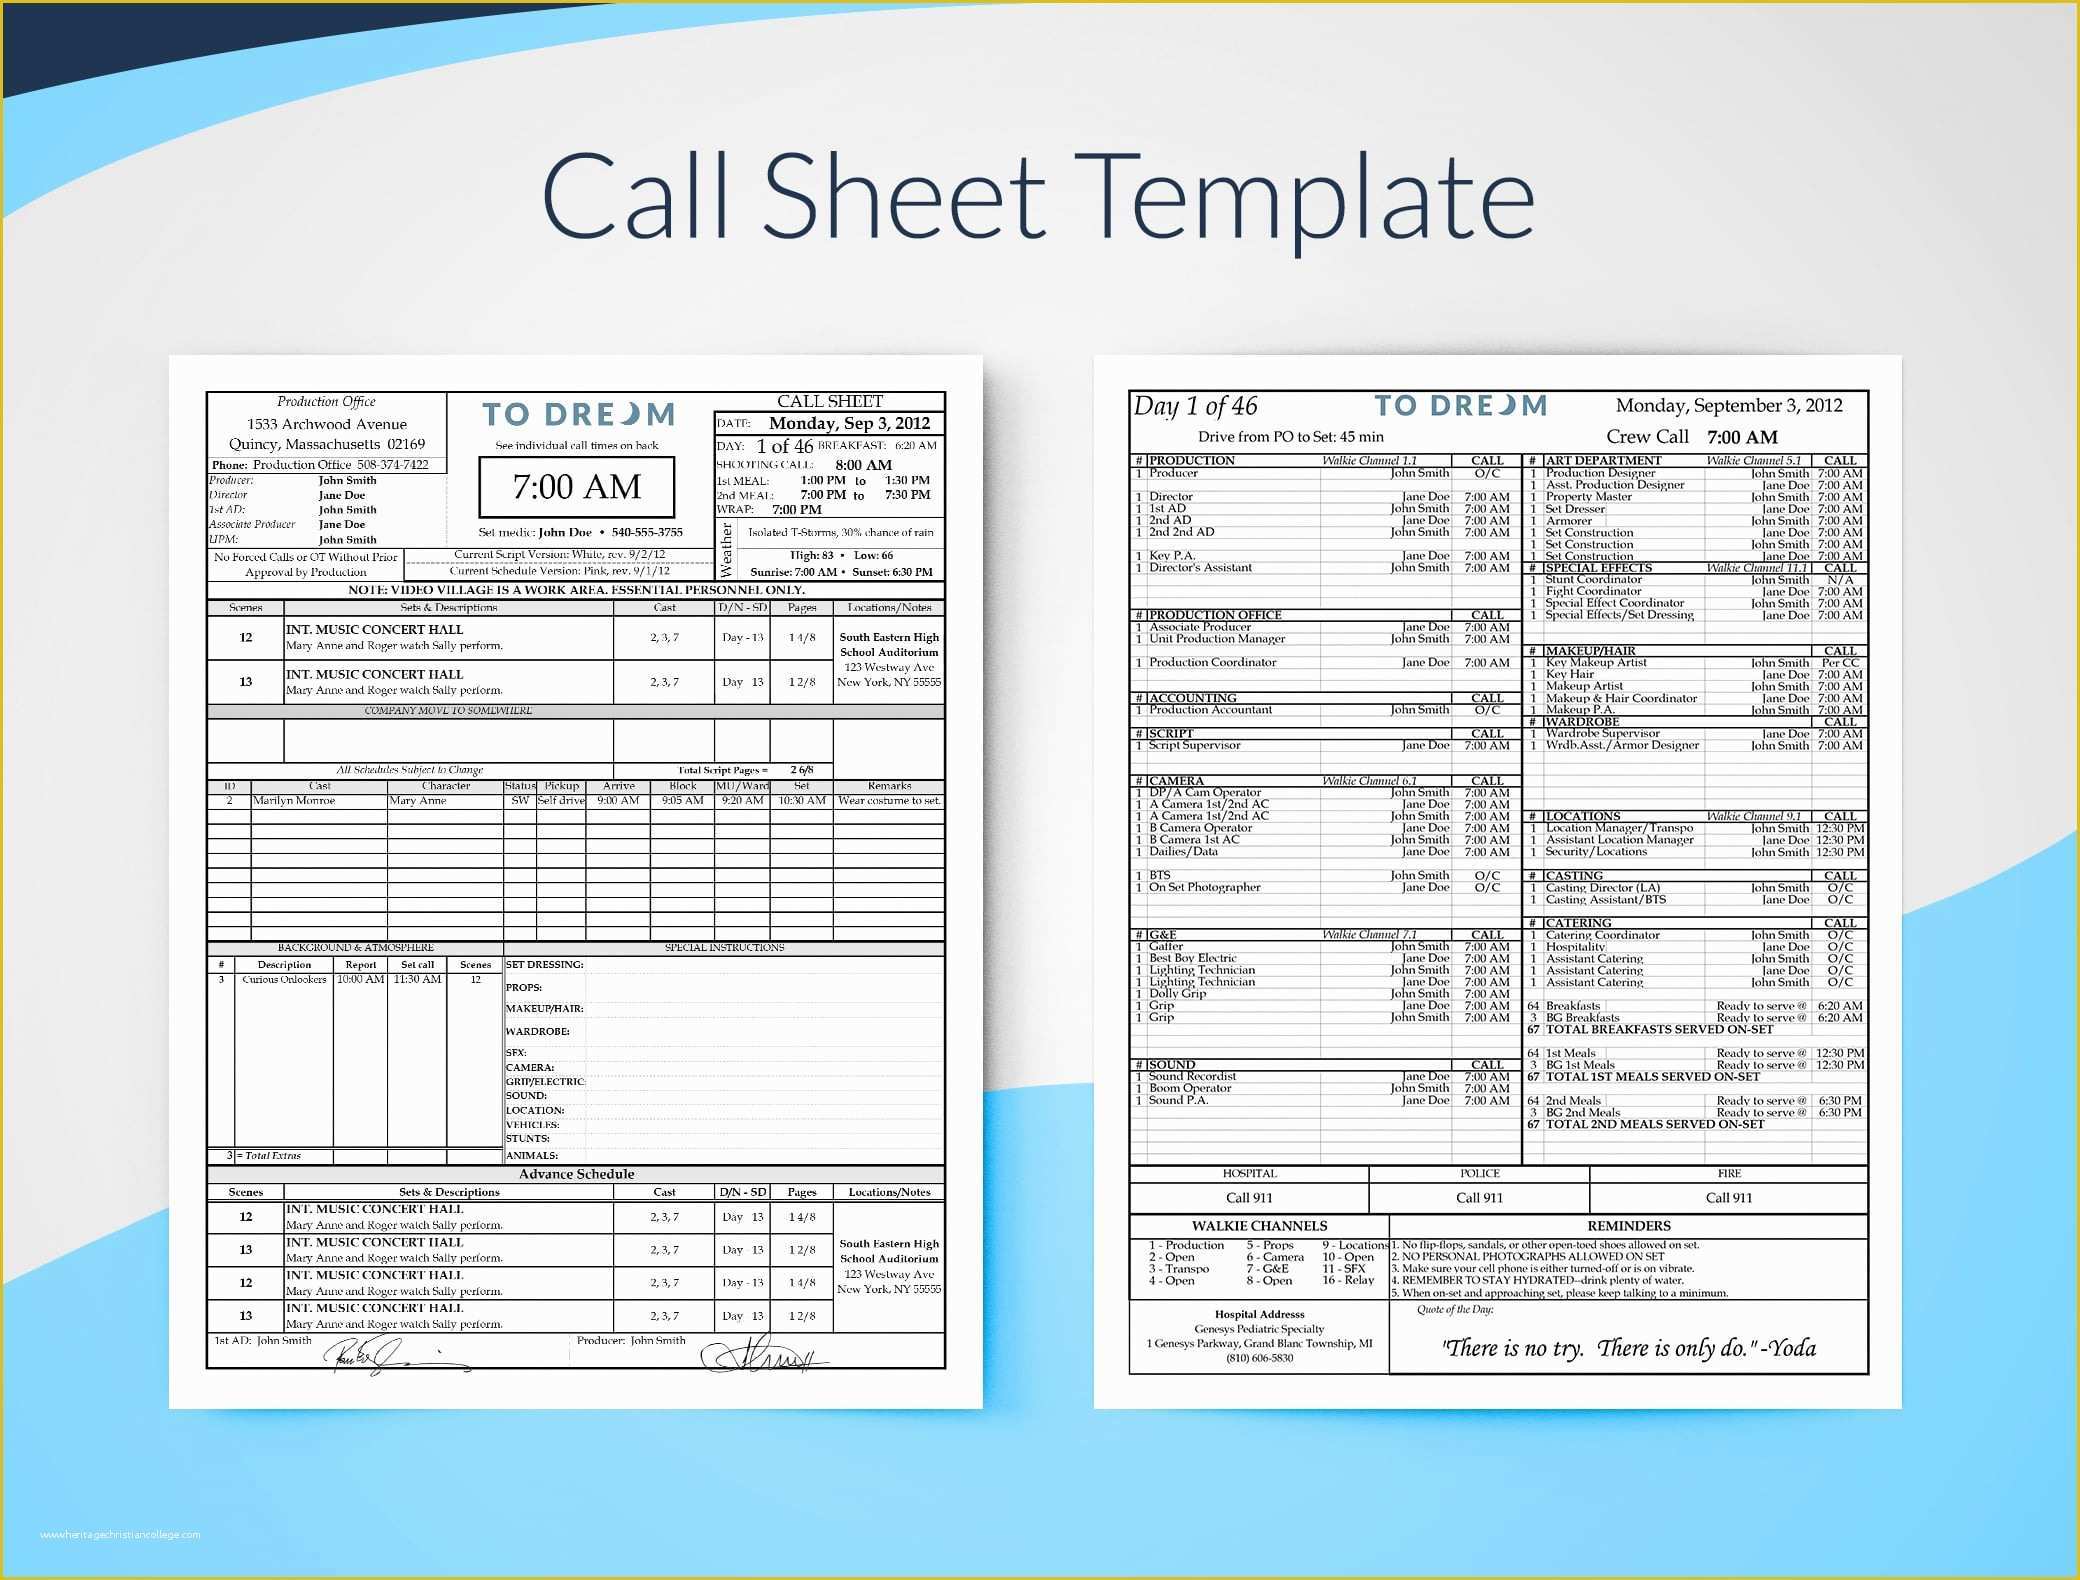 Call Sheet Template Free Of Call Sheet Template for Excel Free Download